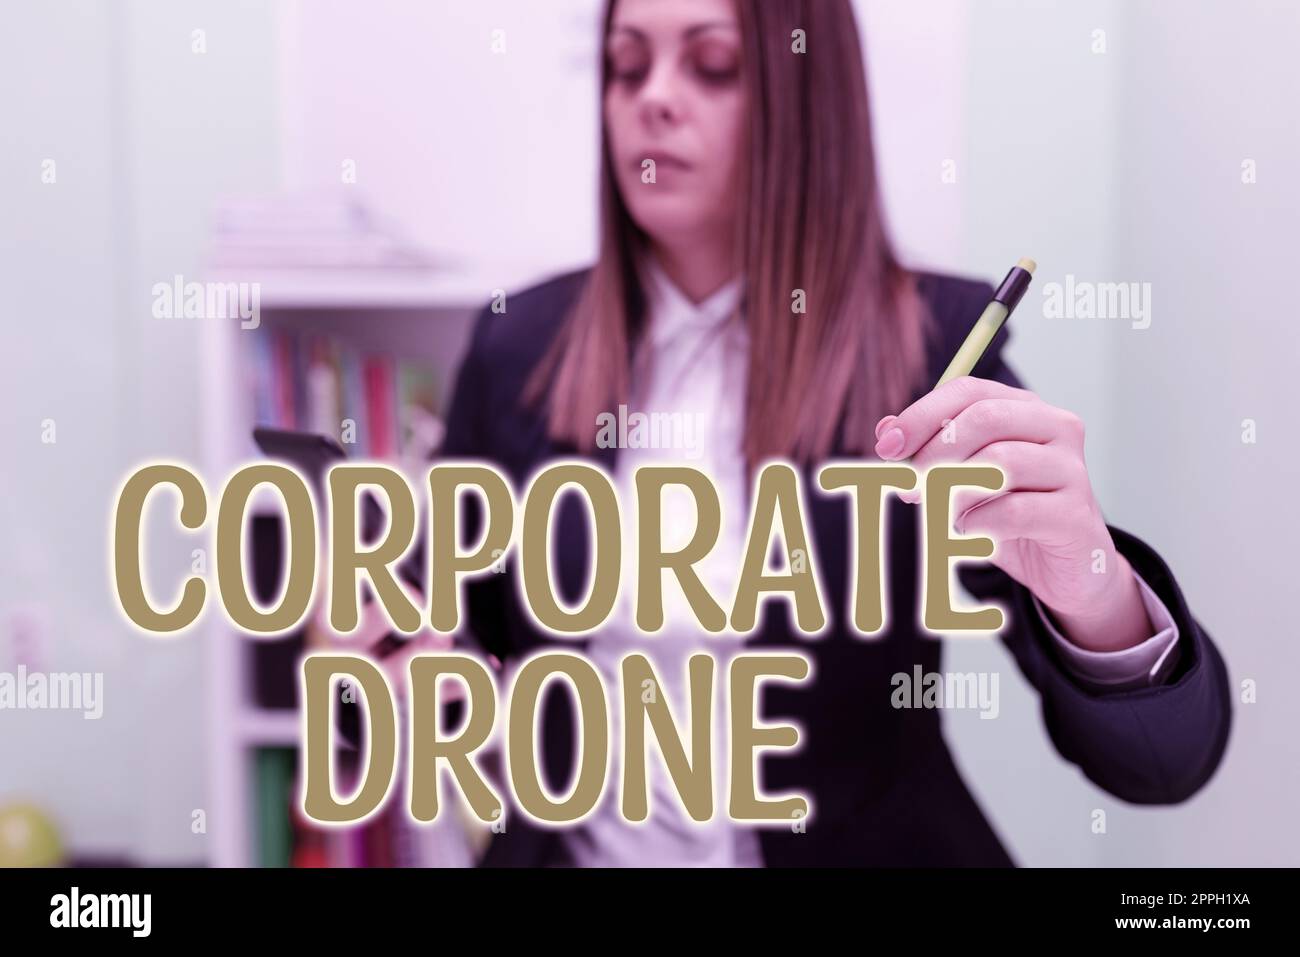 Inspiration showing sign Corporate Drone. Conceptual photo unmanned aerial vehicles used to monitor business vicinity Stock Photo